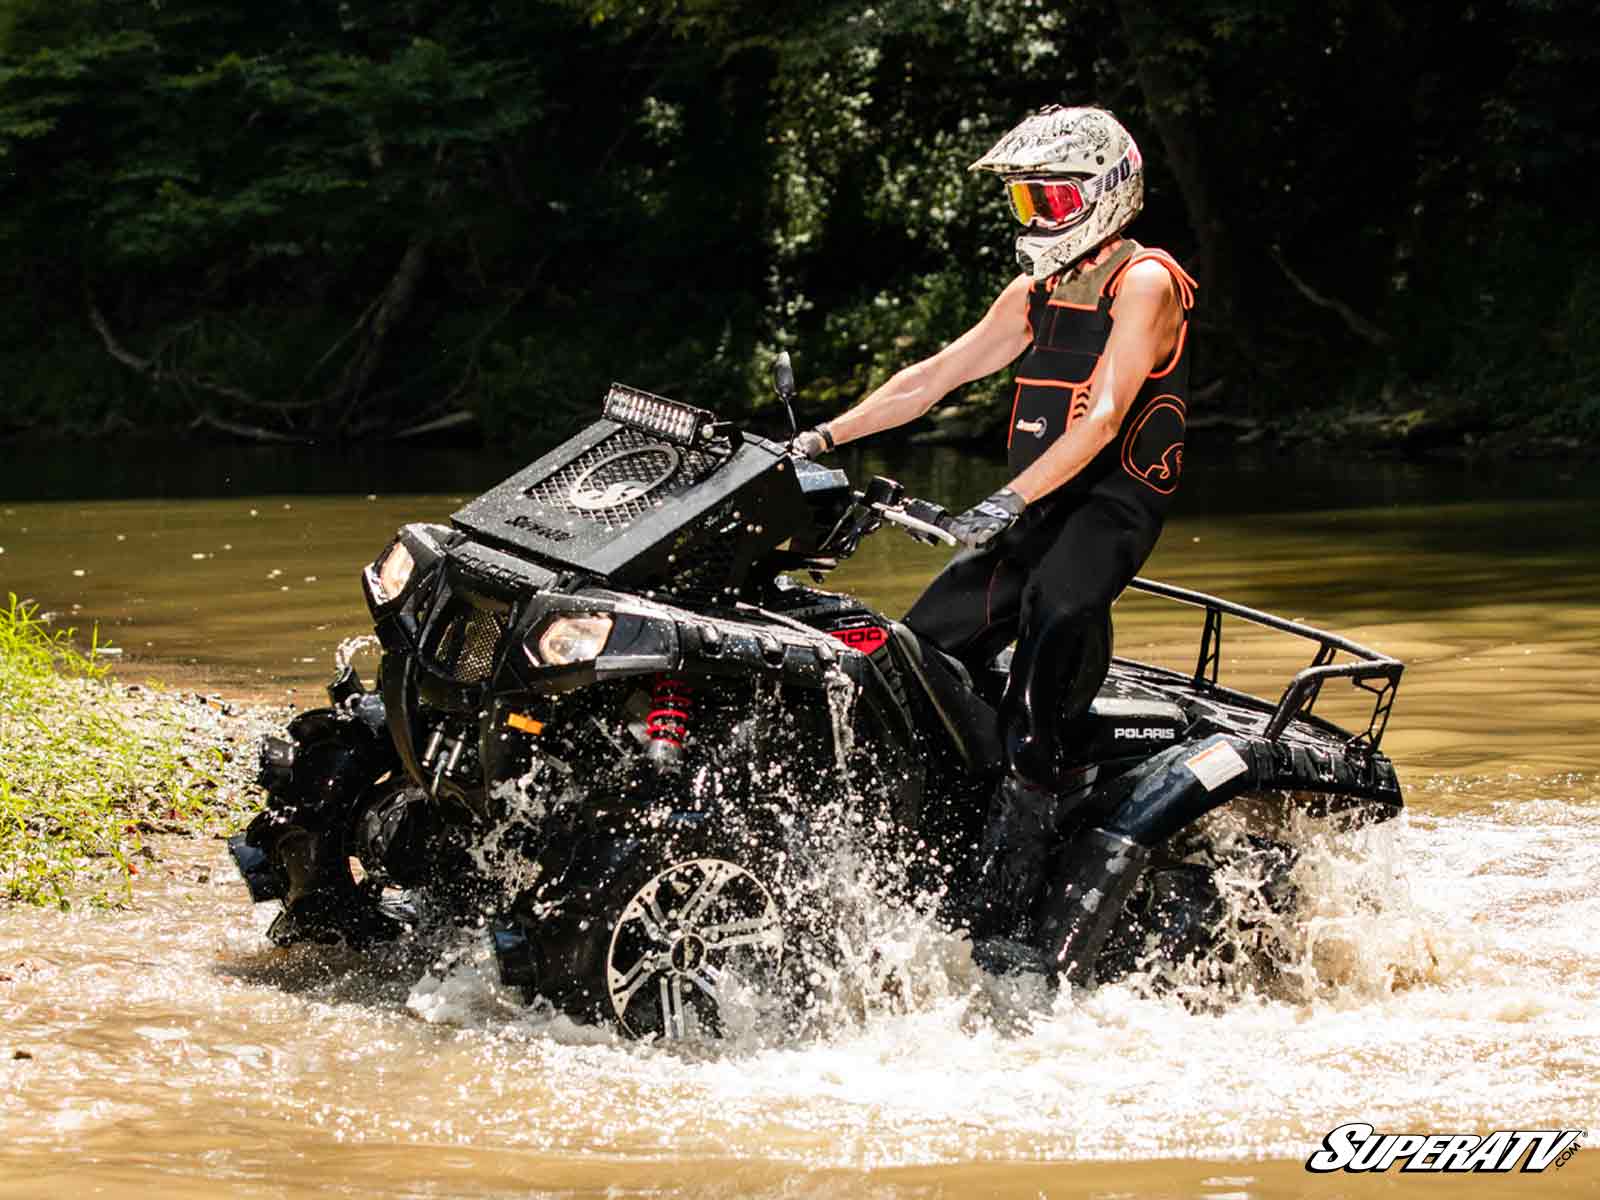 Gator Waders - Mud Riding Gear You Need and Here's Why! 